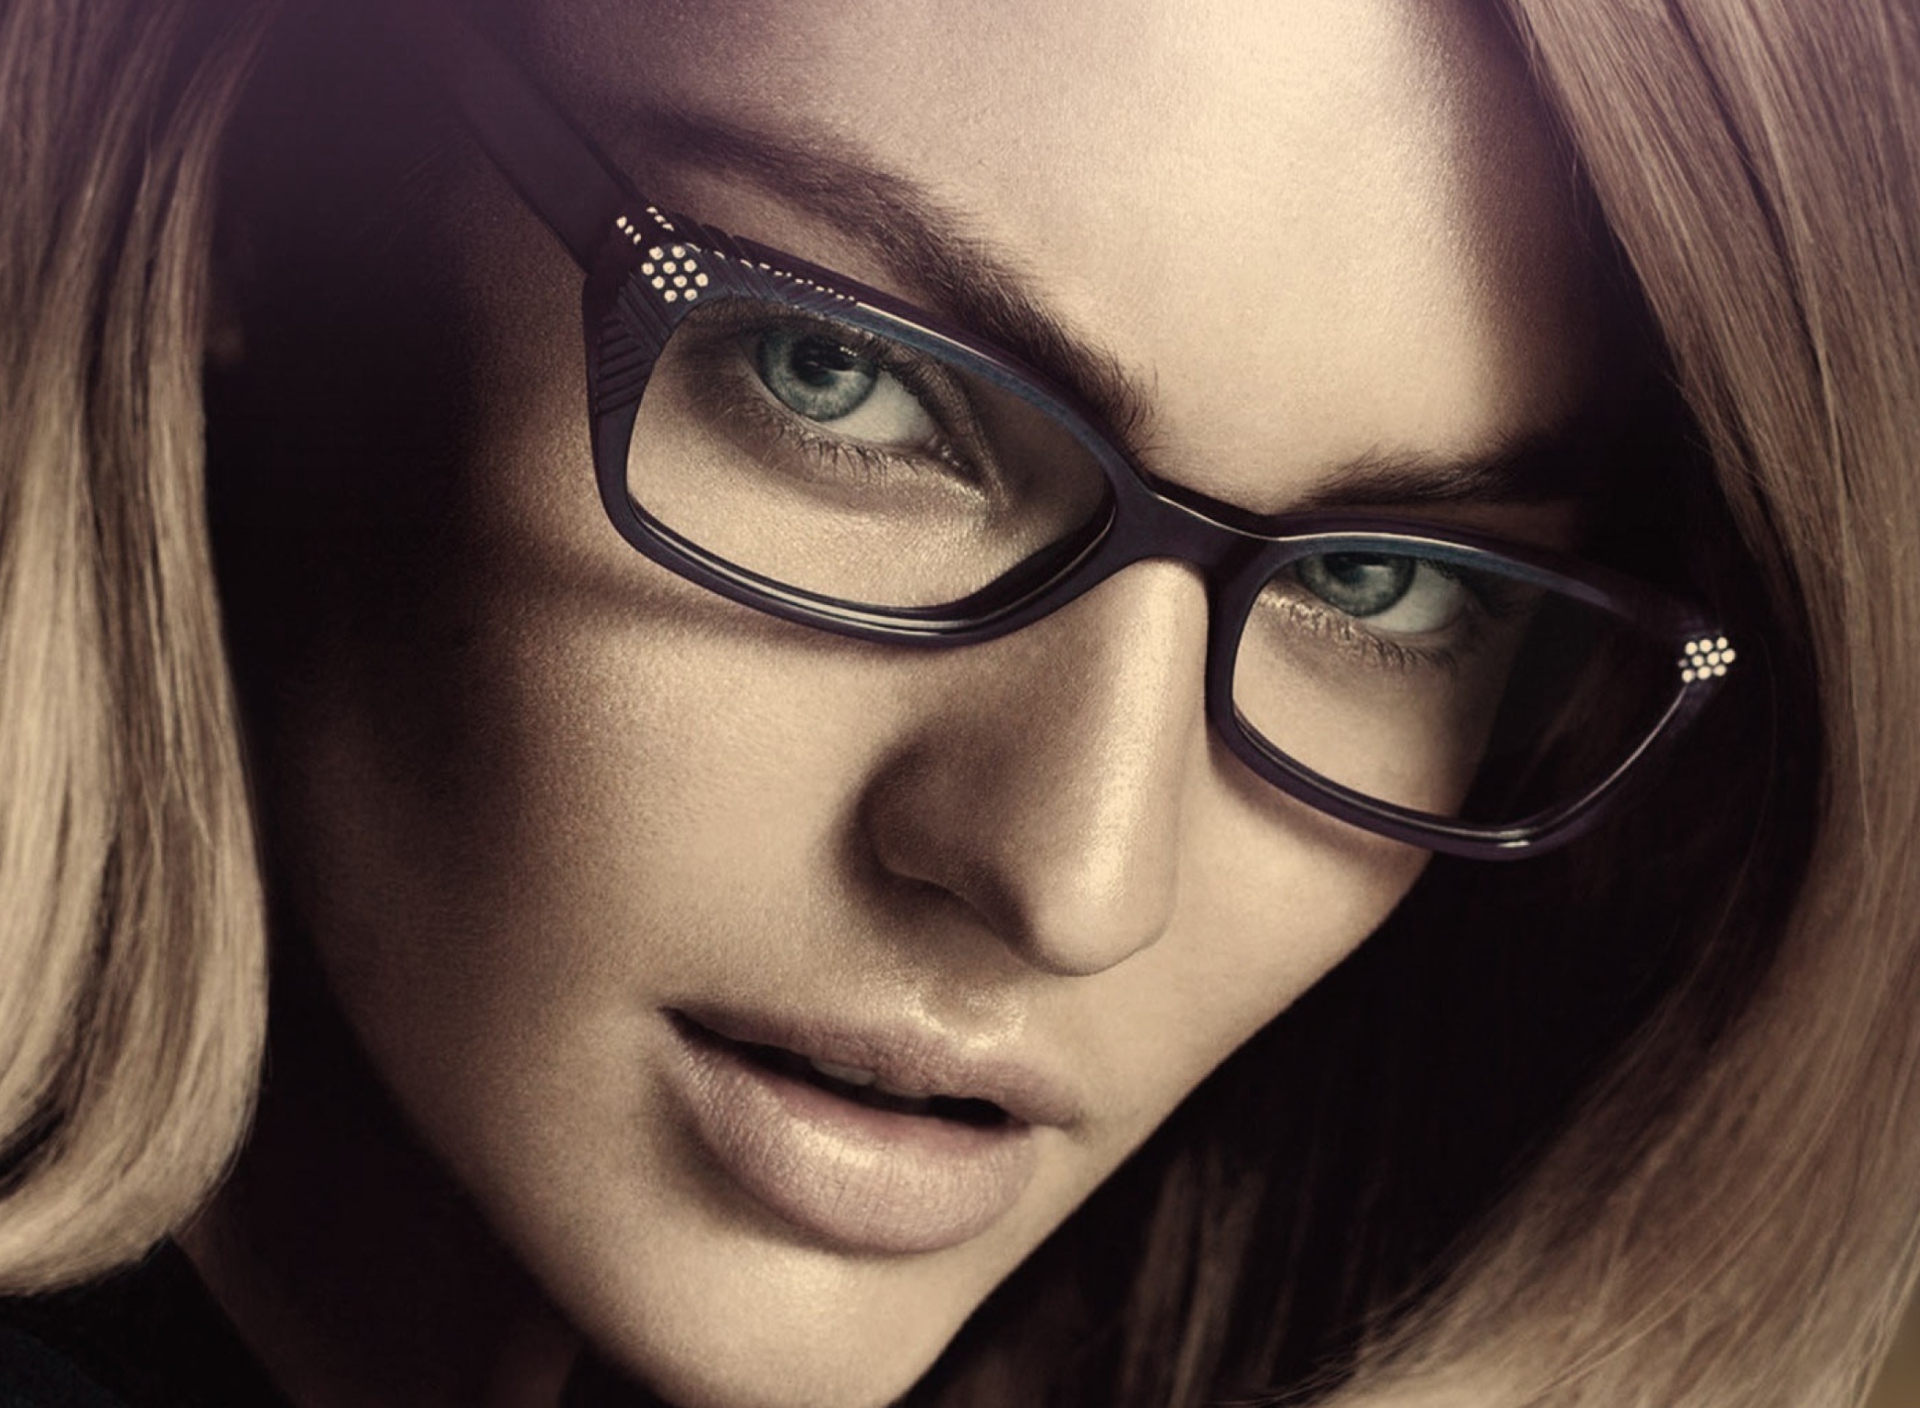 Candice Swanepoel In Glasses wallpaper 1920x1408